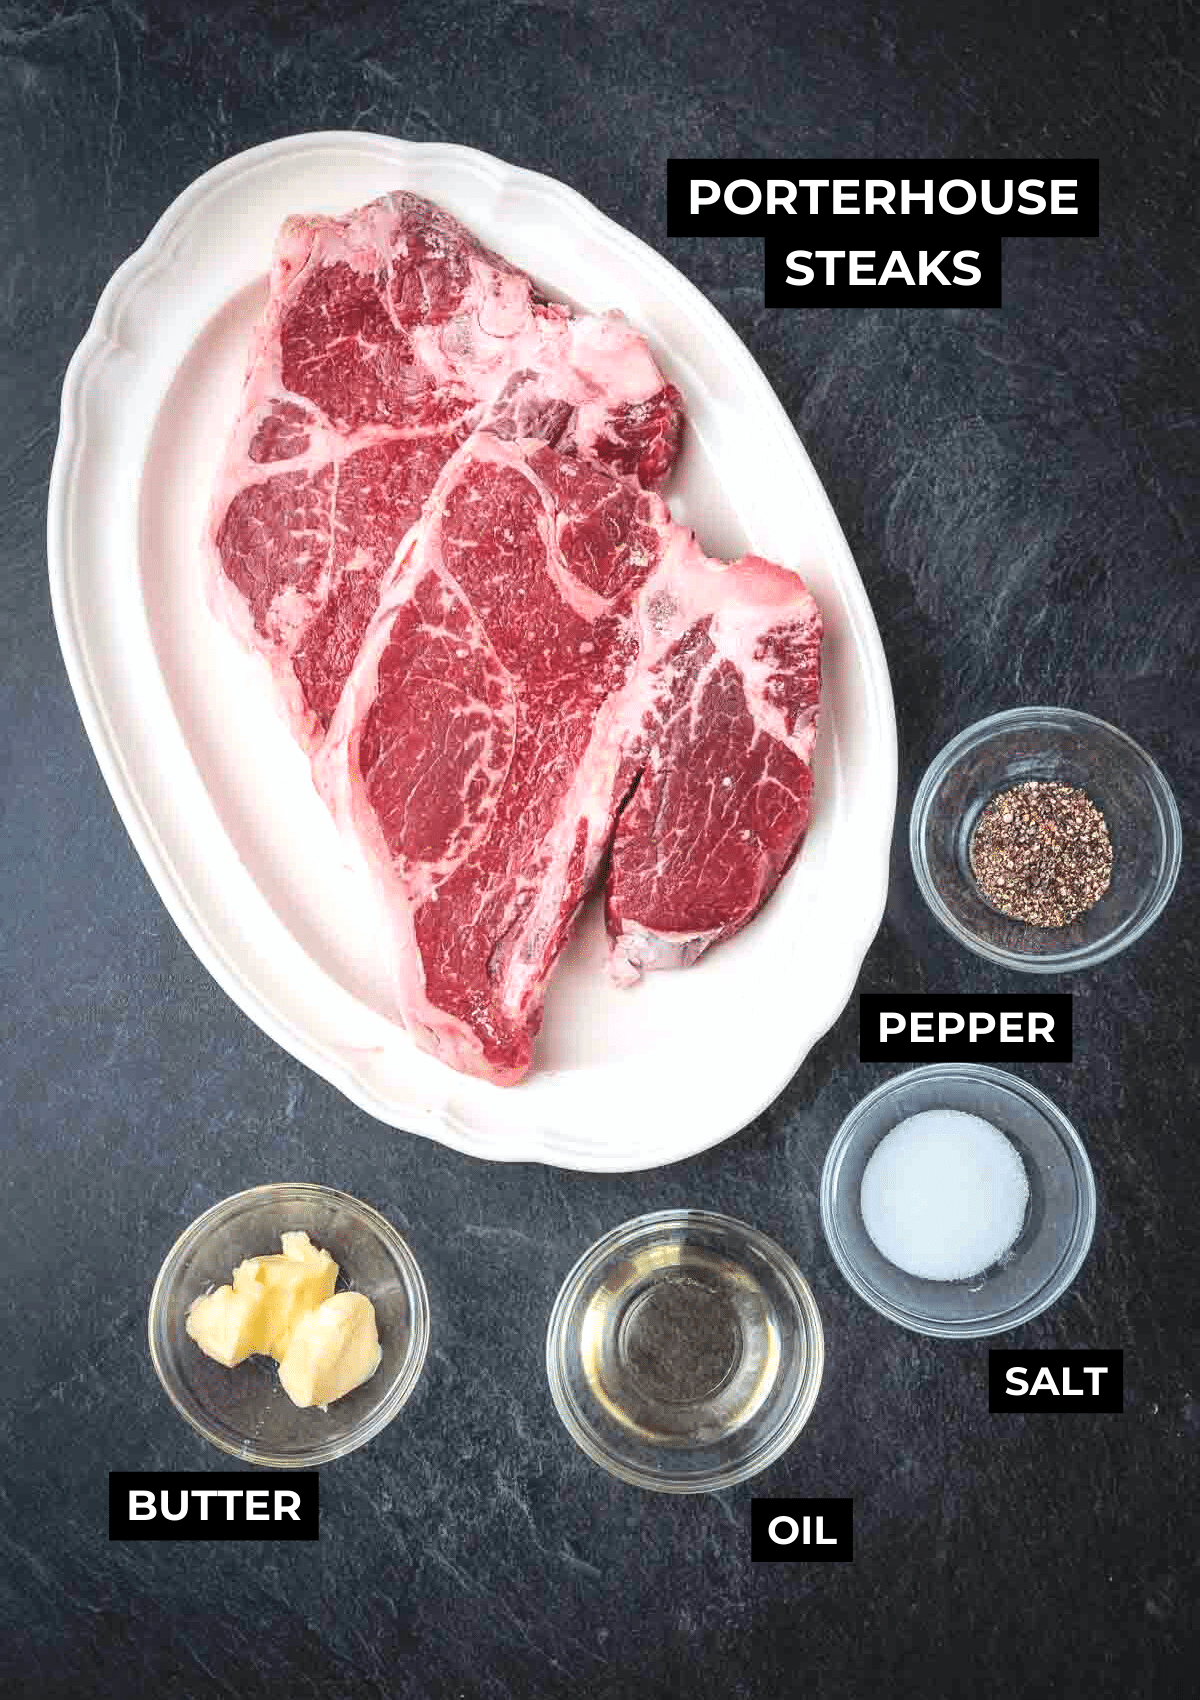 Ingredients for pan searing these steaks. 